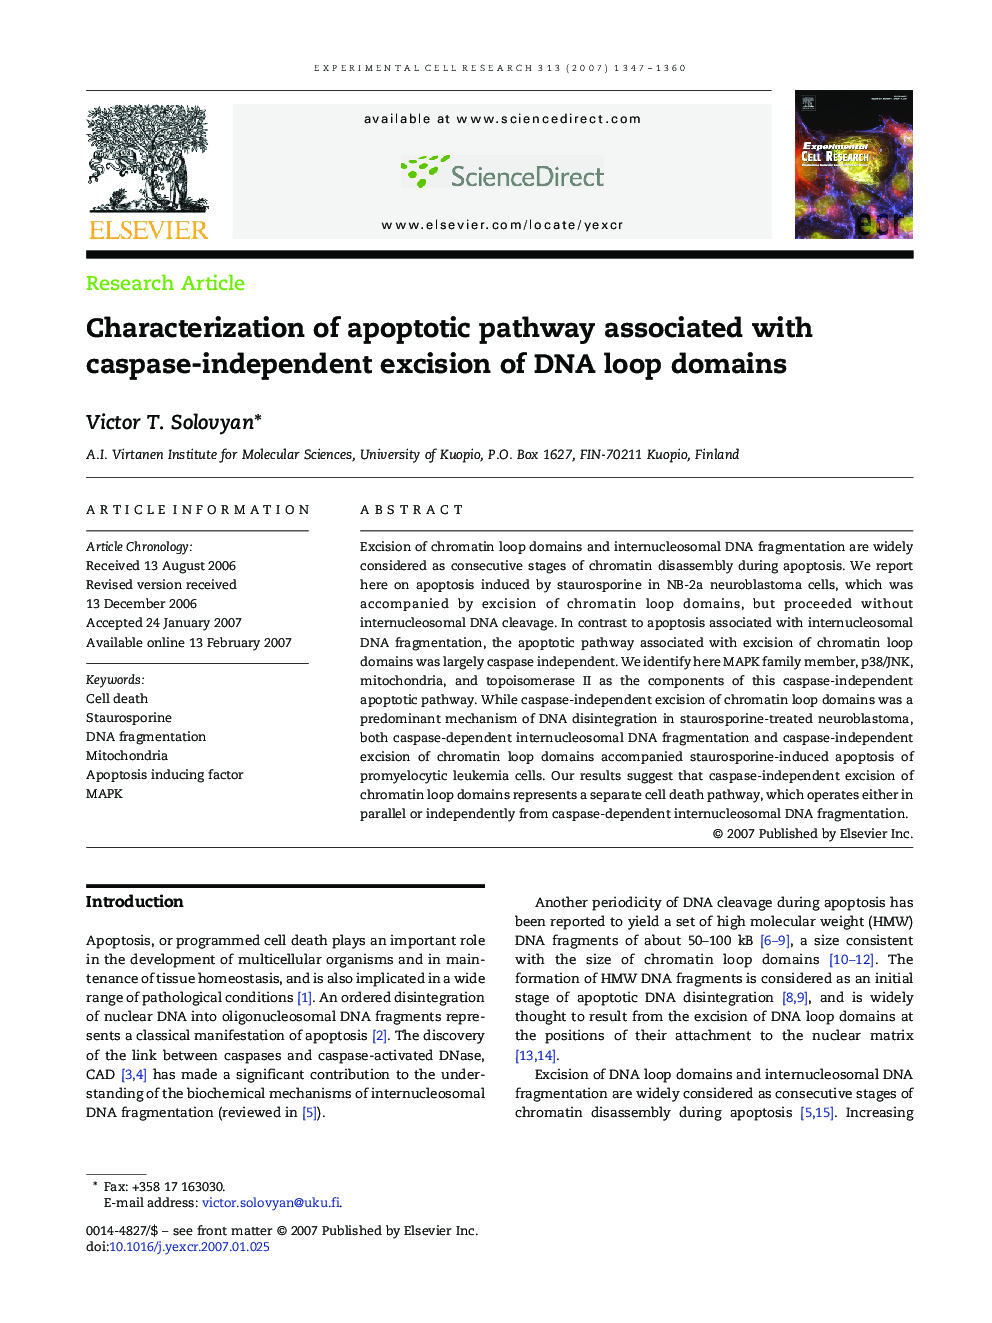 Characterization of apoptotic pathway associated with caspase-independent excision of DNA loop domains